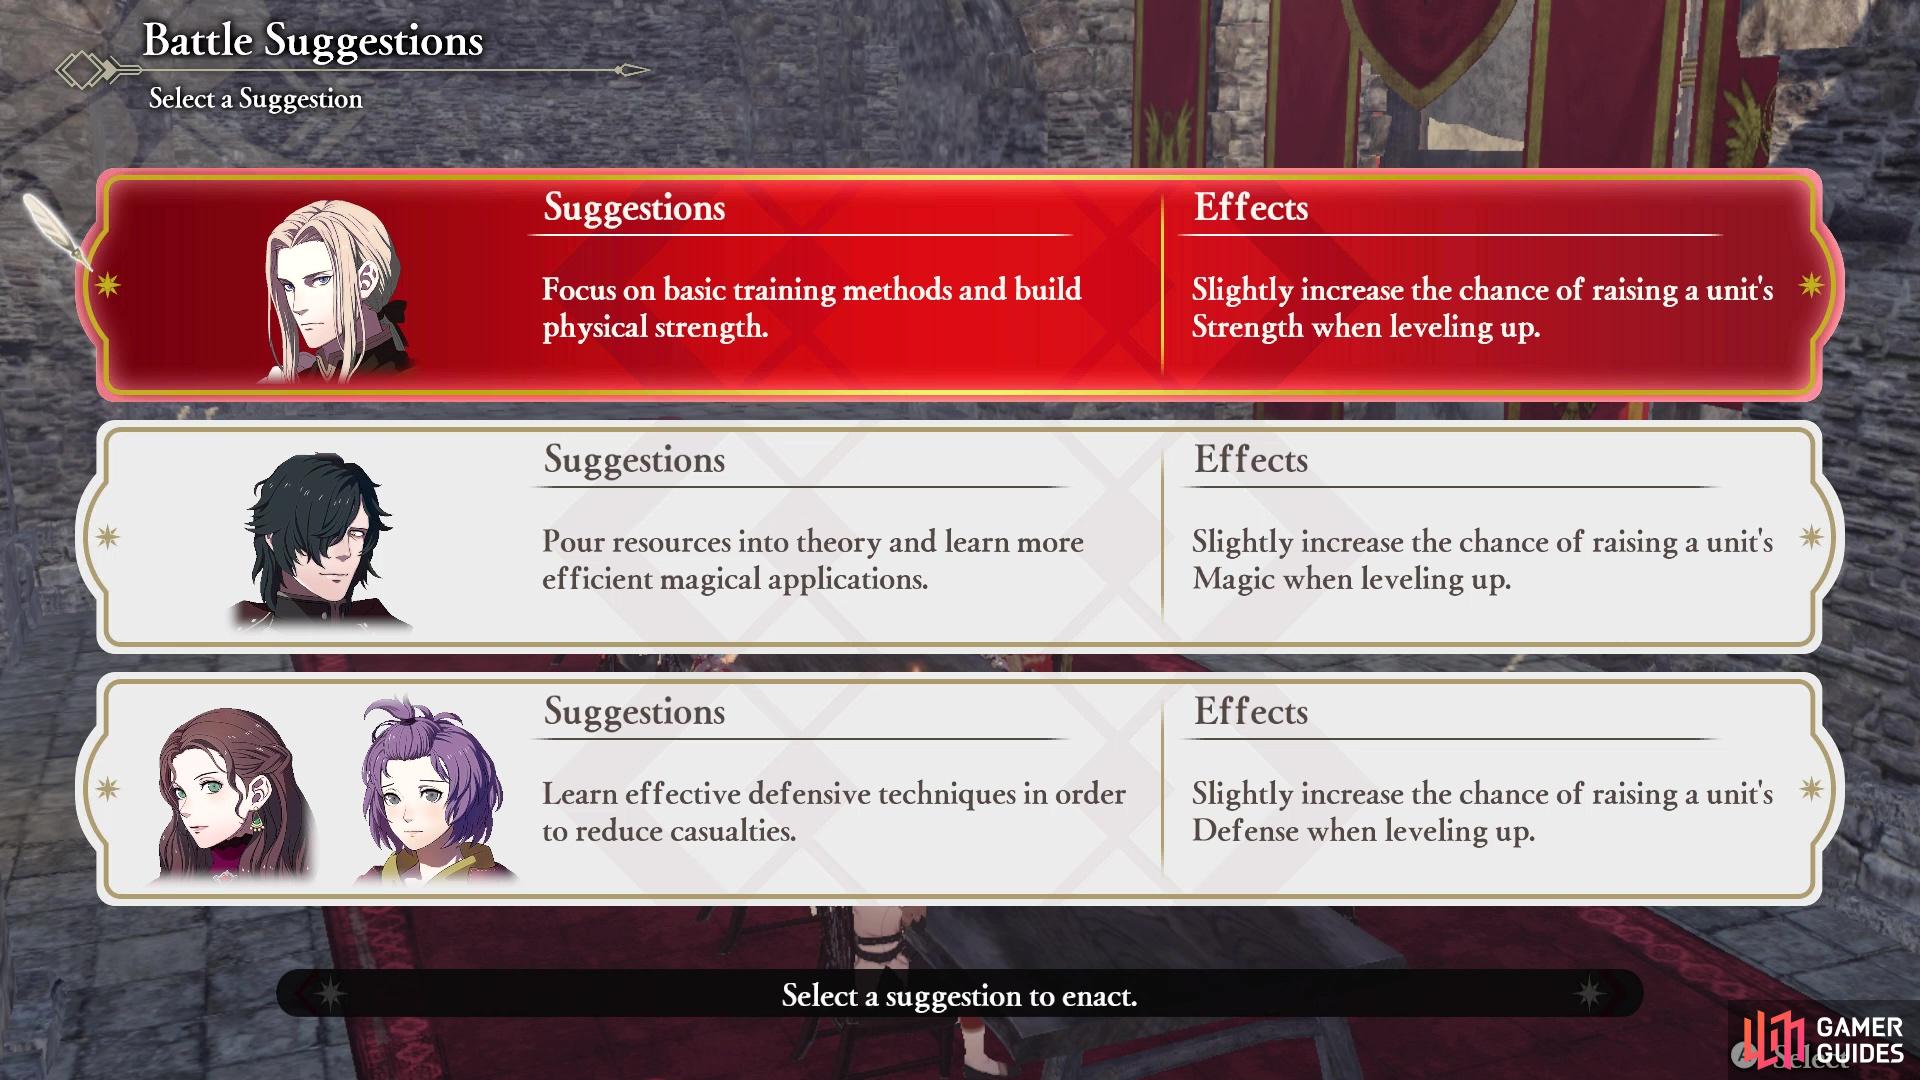 The Battle Suggestions for Chapter 12 of Scarlet Blaze